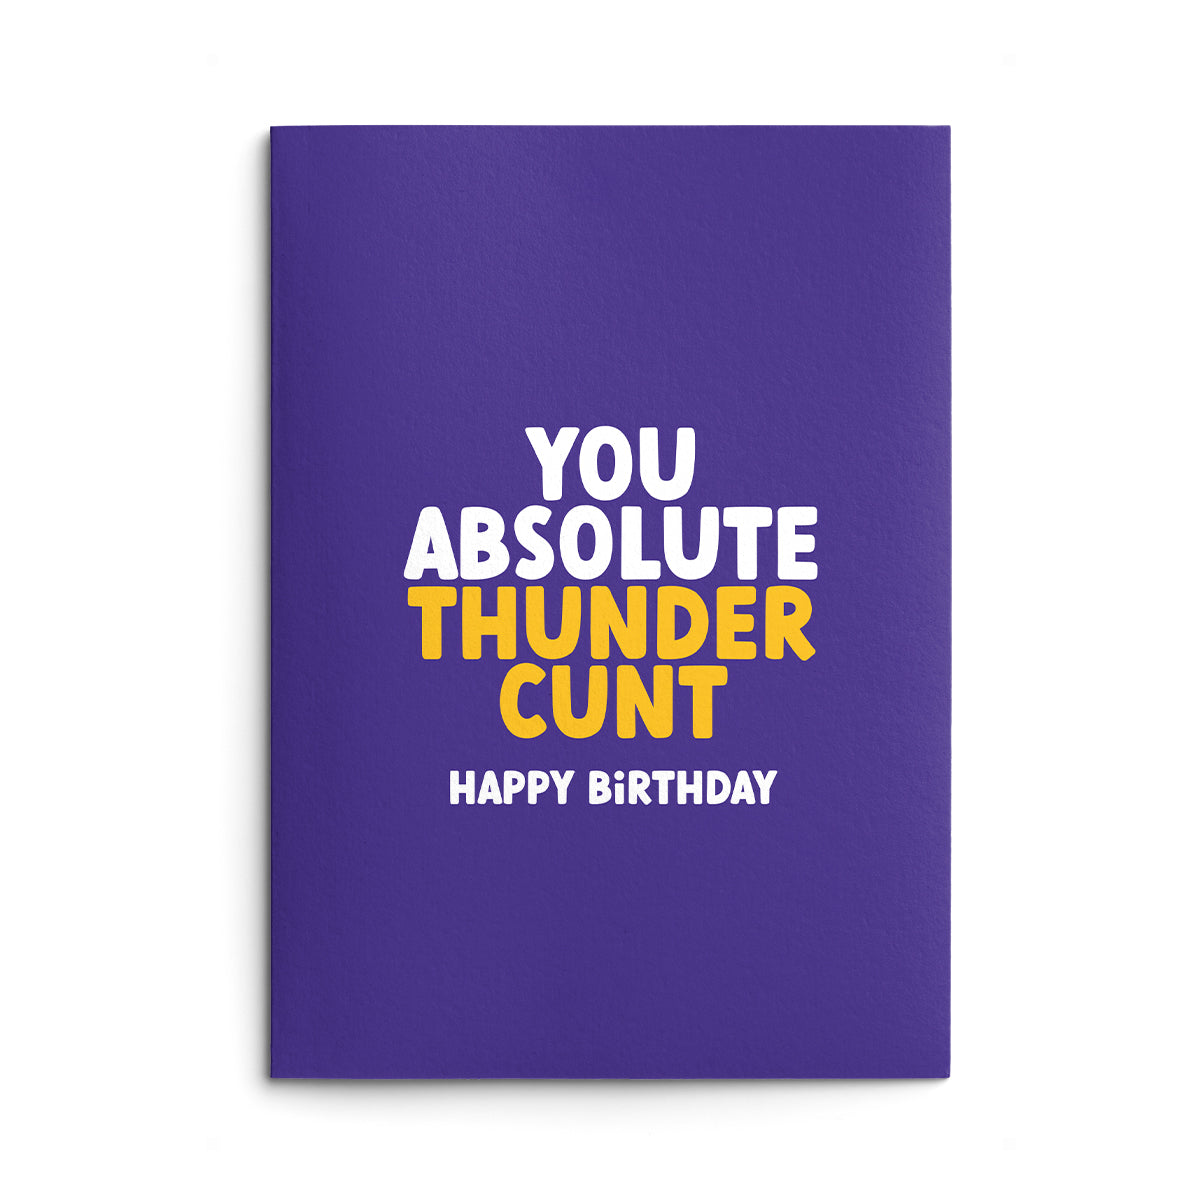 Absolute Thunder Cunt Birthday Card